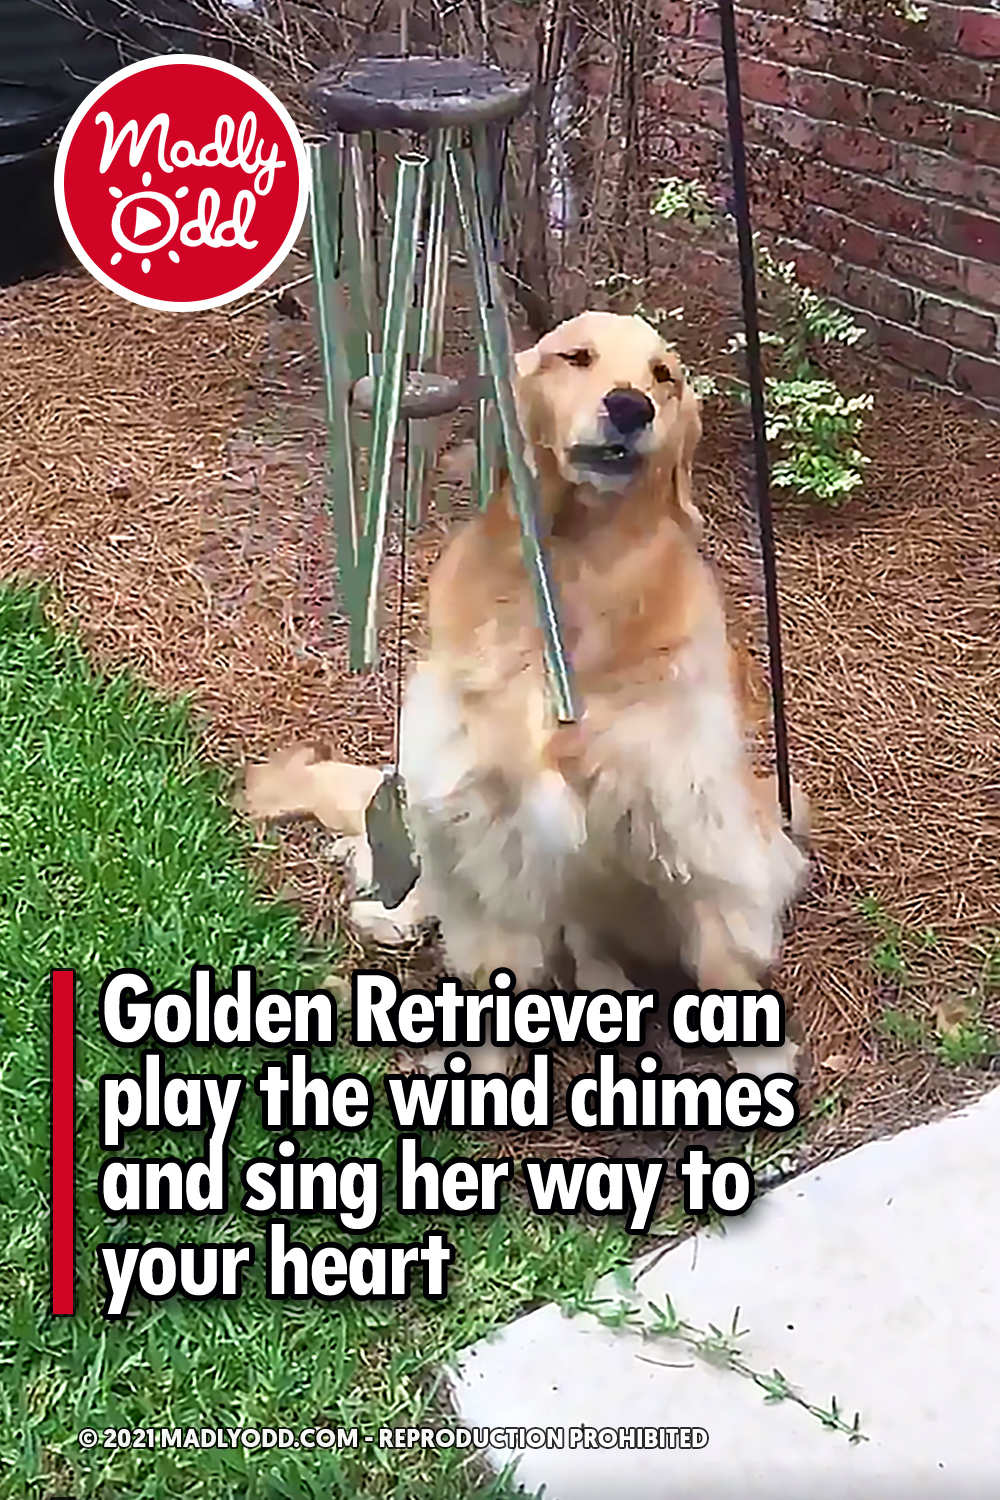 Golden Retriever can play the wind chimes and sing her way to your heart